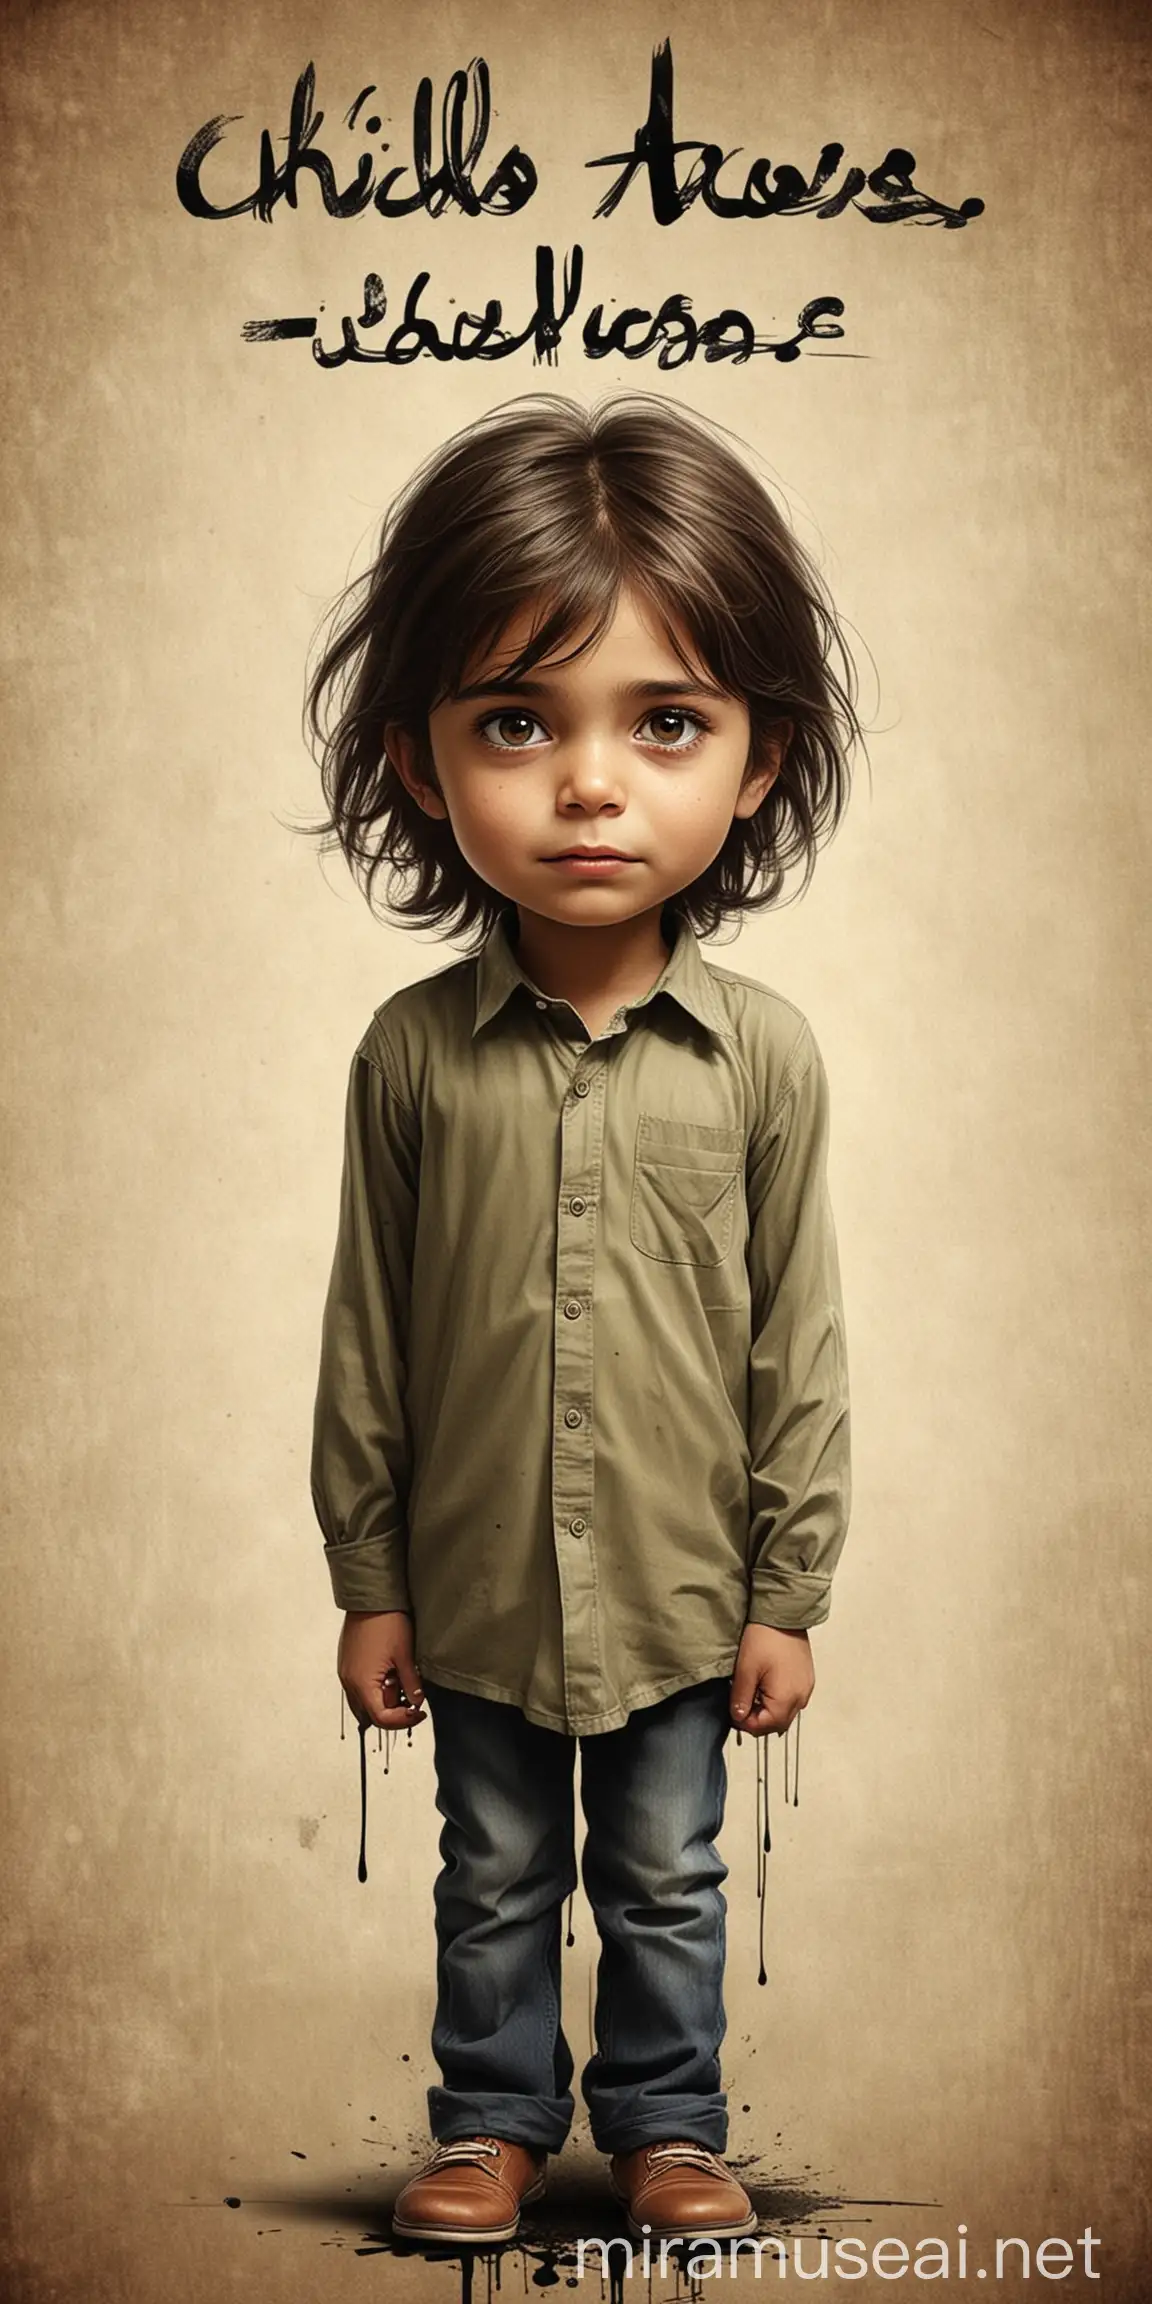 A WELL DESIGNED DEPICTIN GOOD IDEA ABOUT CHILD ABUSE ,POSTER MADE ON ILLUSTRATOR OR PHOTOSHOP IT SHOULD LOOK LIKE MADE FOR PAKISTAN